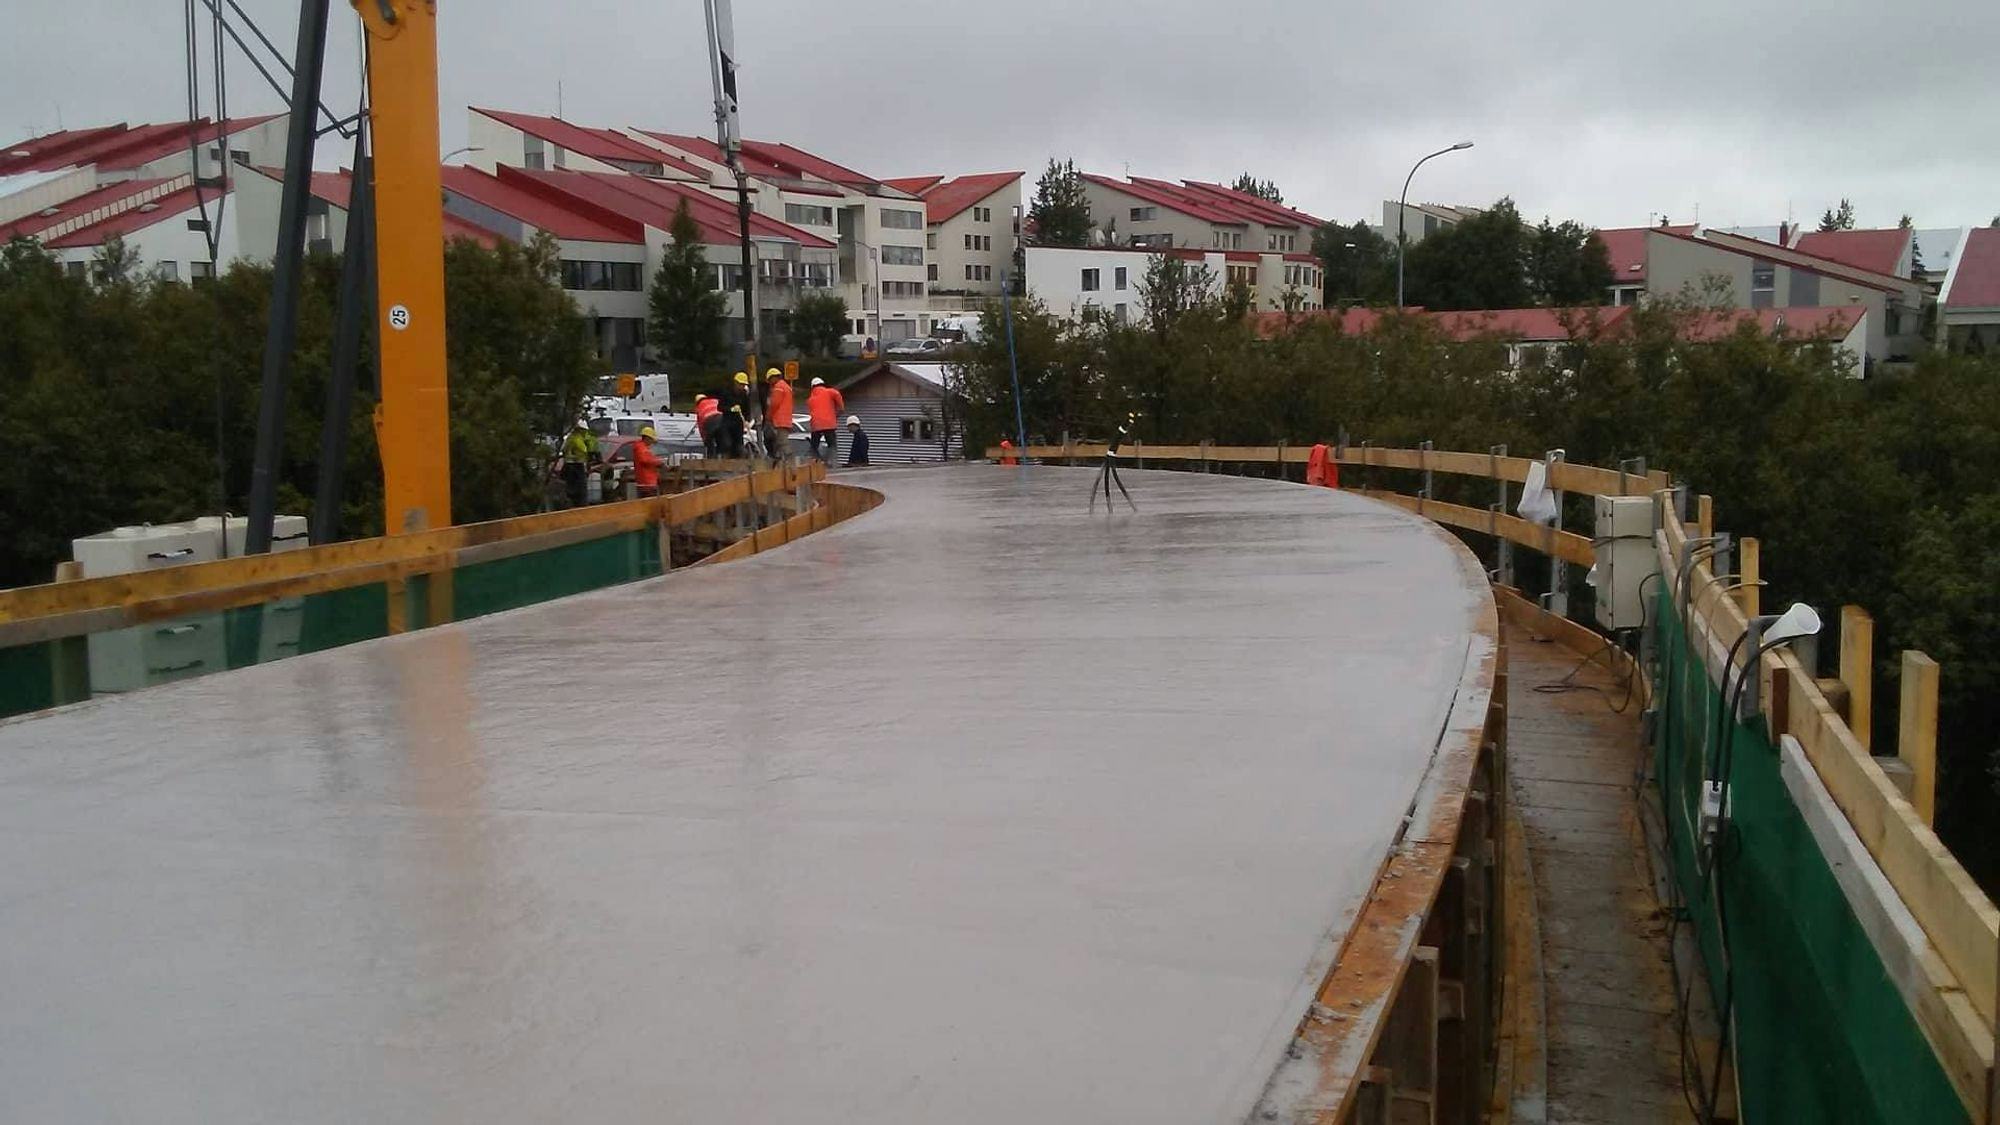 Newly cast concrete surface of a bridge with construction workers in the background